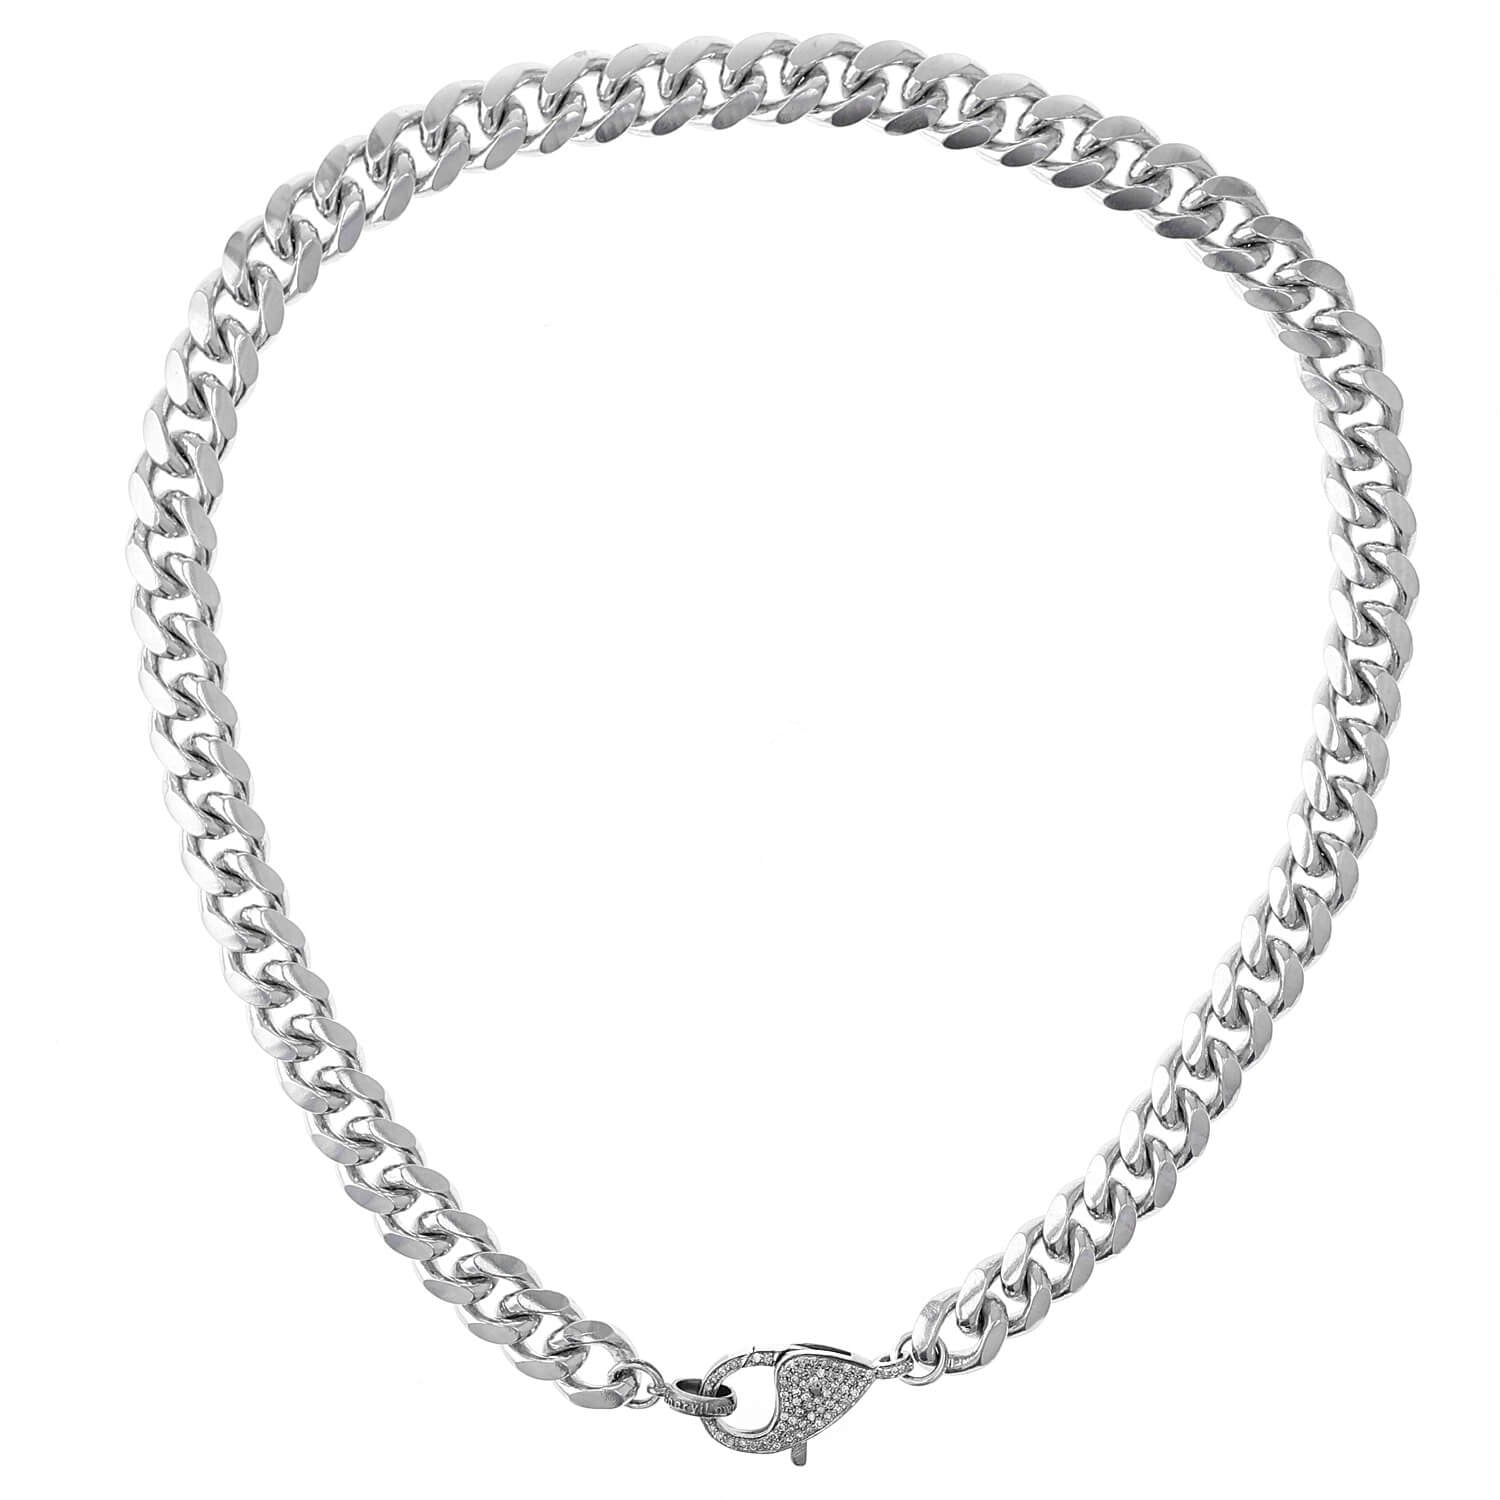 Chunky Miami Link Chain Necklace with Diamond Clasp - 18"  N0003331 - TBird